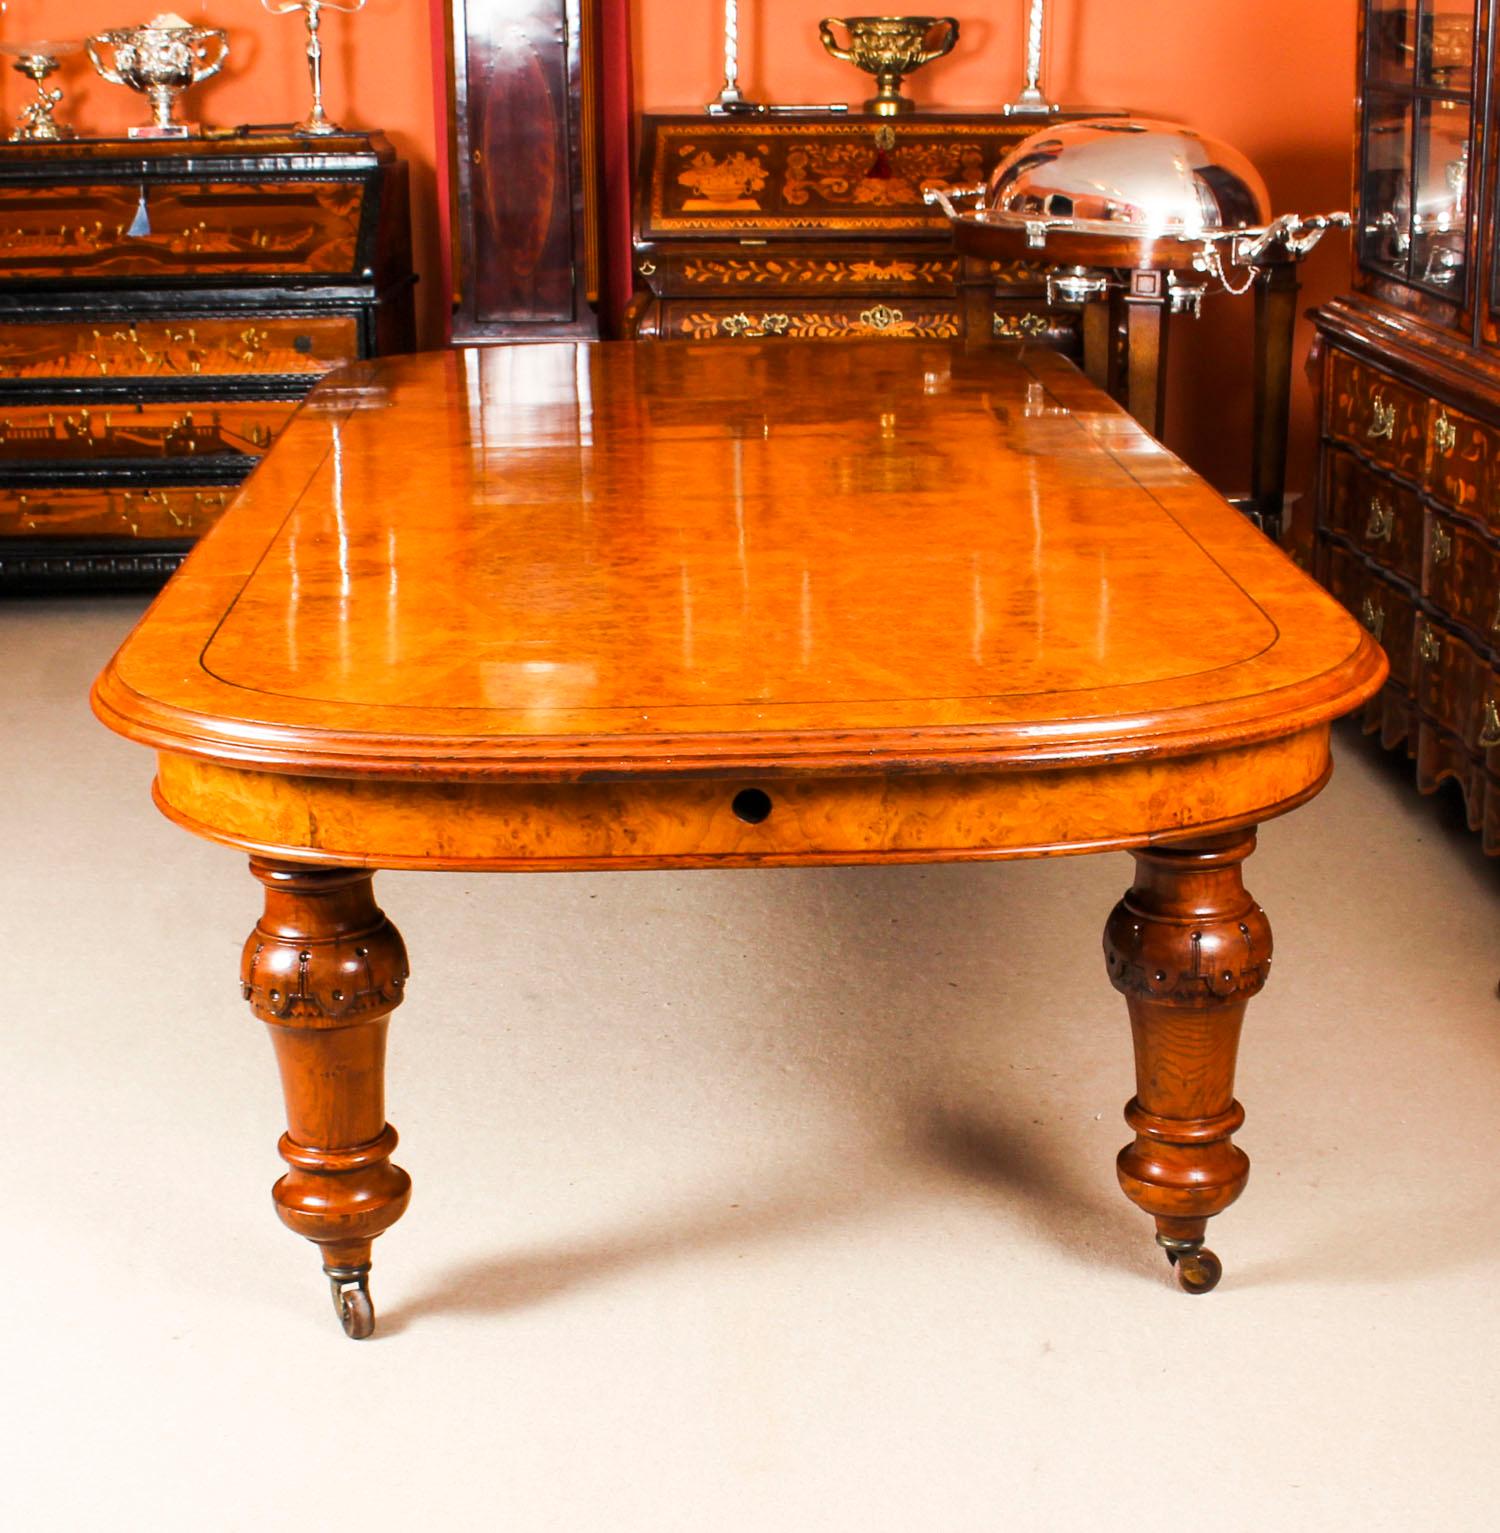 There is no mistaking the style and sophisticated design of this wonderful rare English antique Victorian pollard oak extending dining table, circa 1850 in date. This stunning dining table will Stand out in your dining or conference room and will